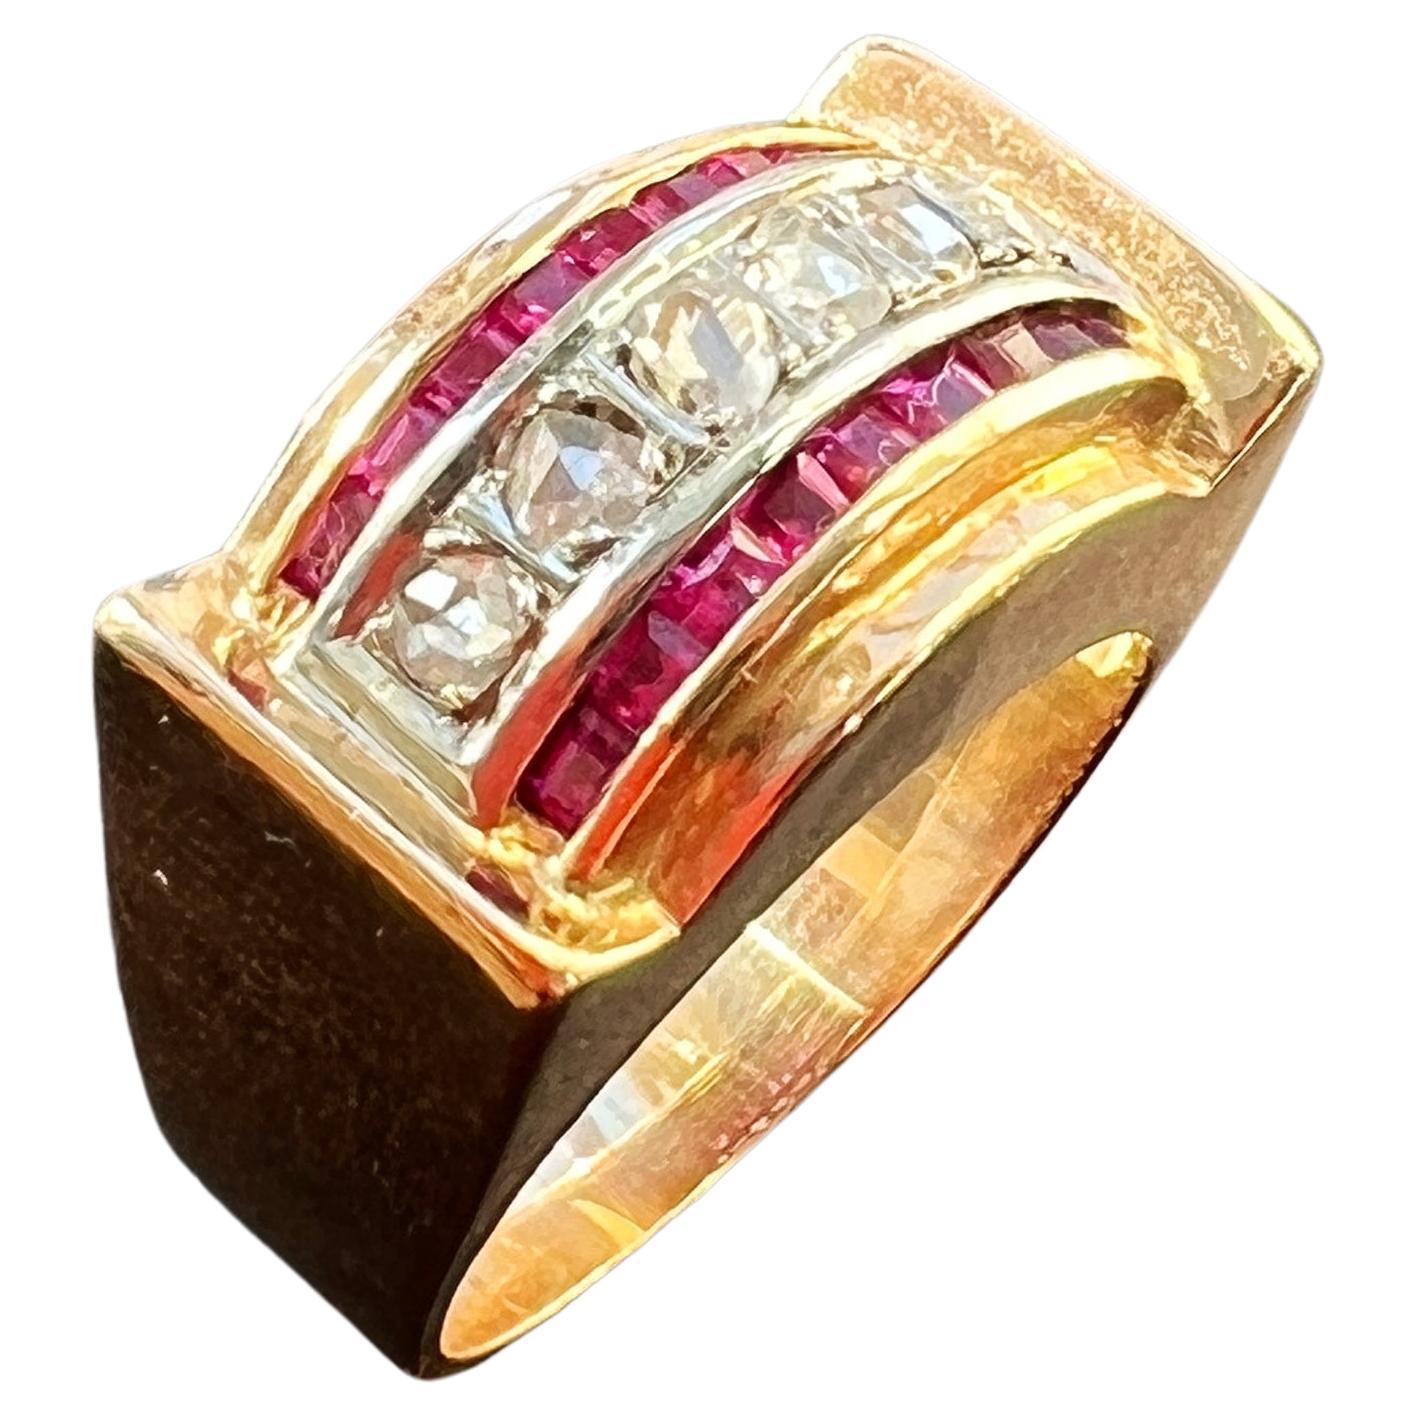 French Vintage Diamond and Ruby 18K Gold Tank Ring